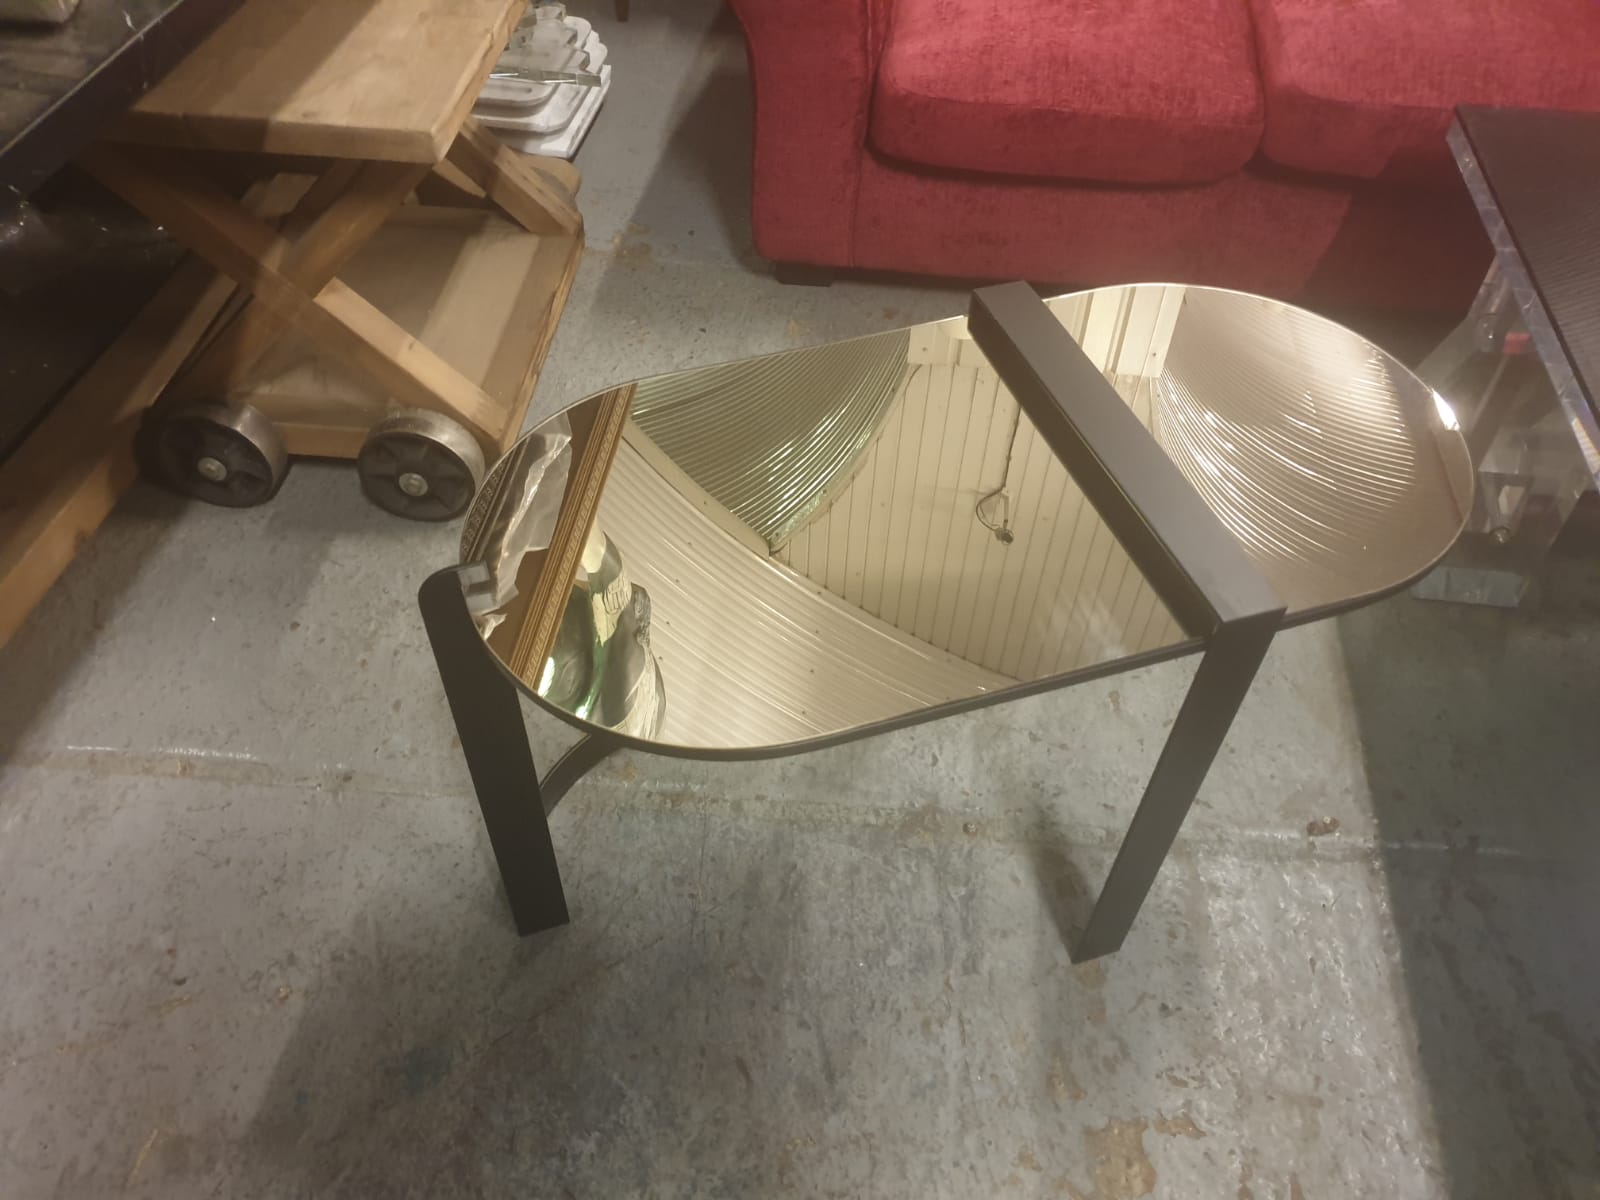 Mirrored glass coffee table with matt black metal frame and legs. 83 x 42 x 52cm condition is